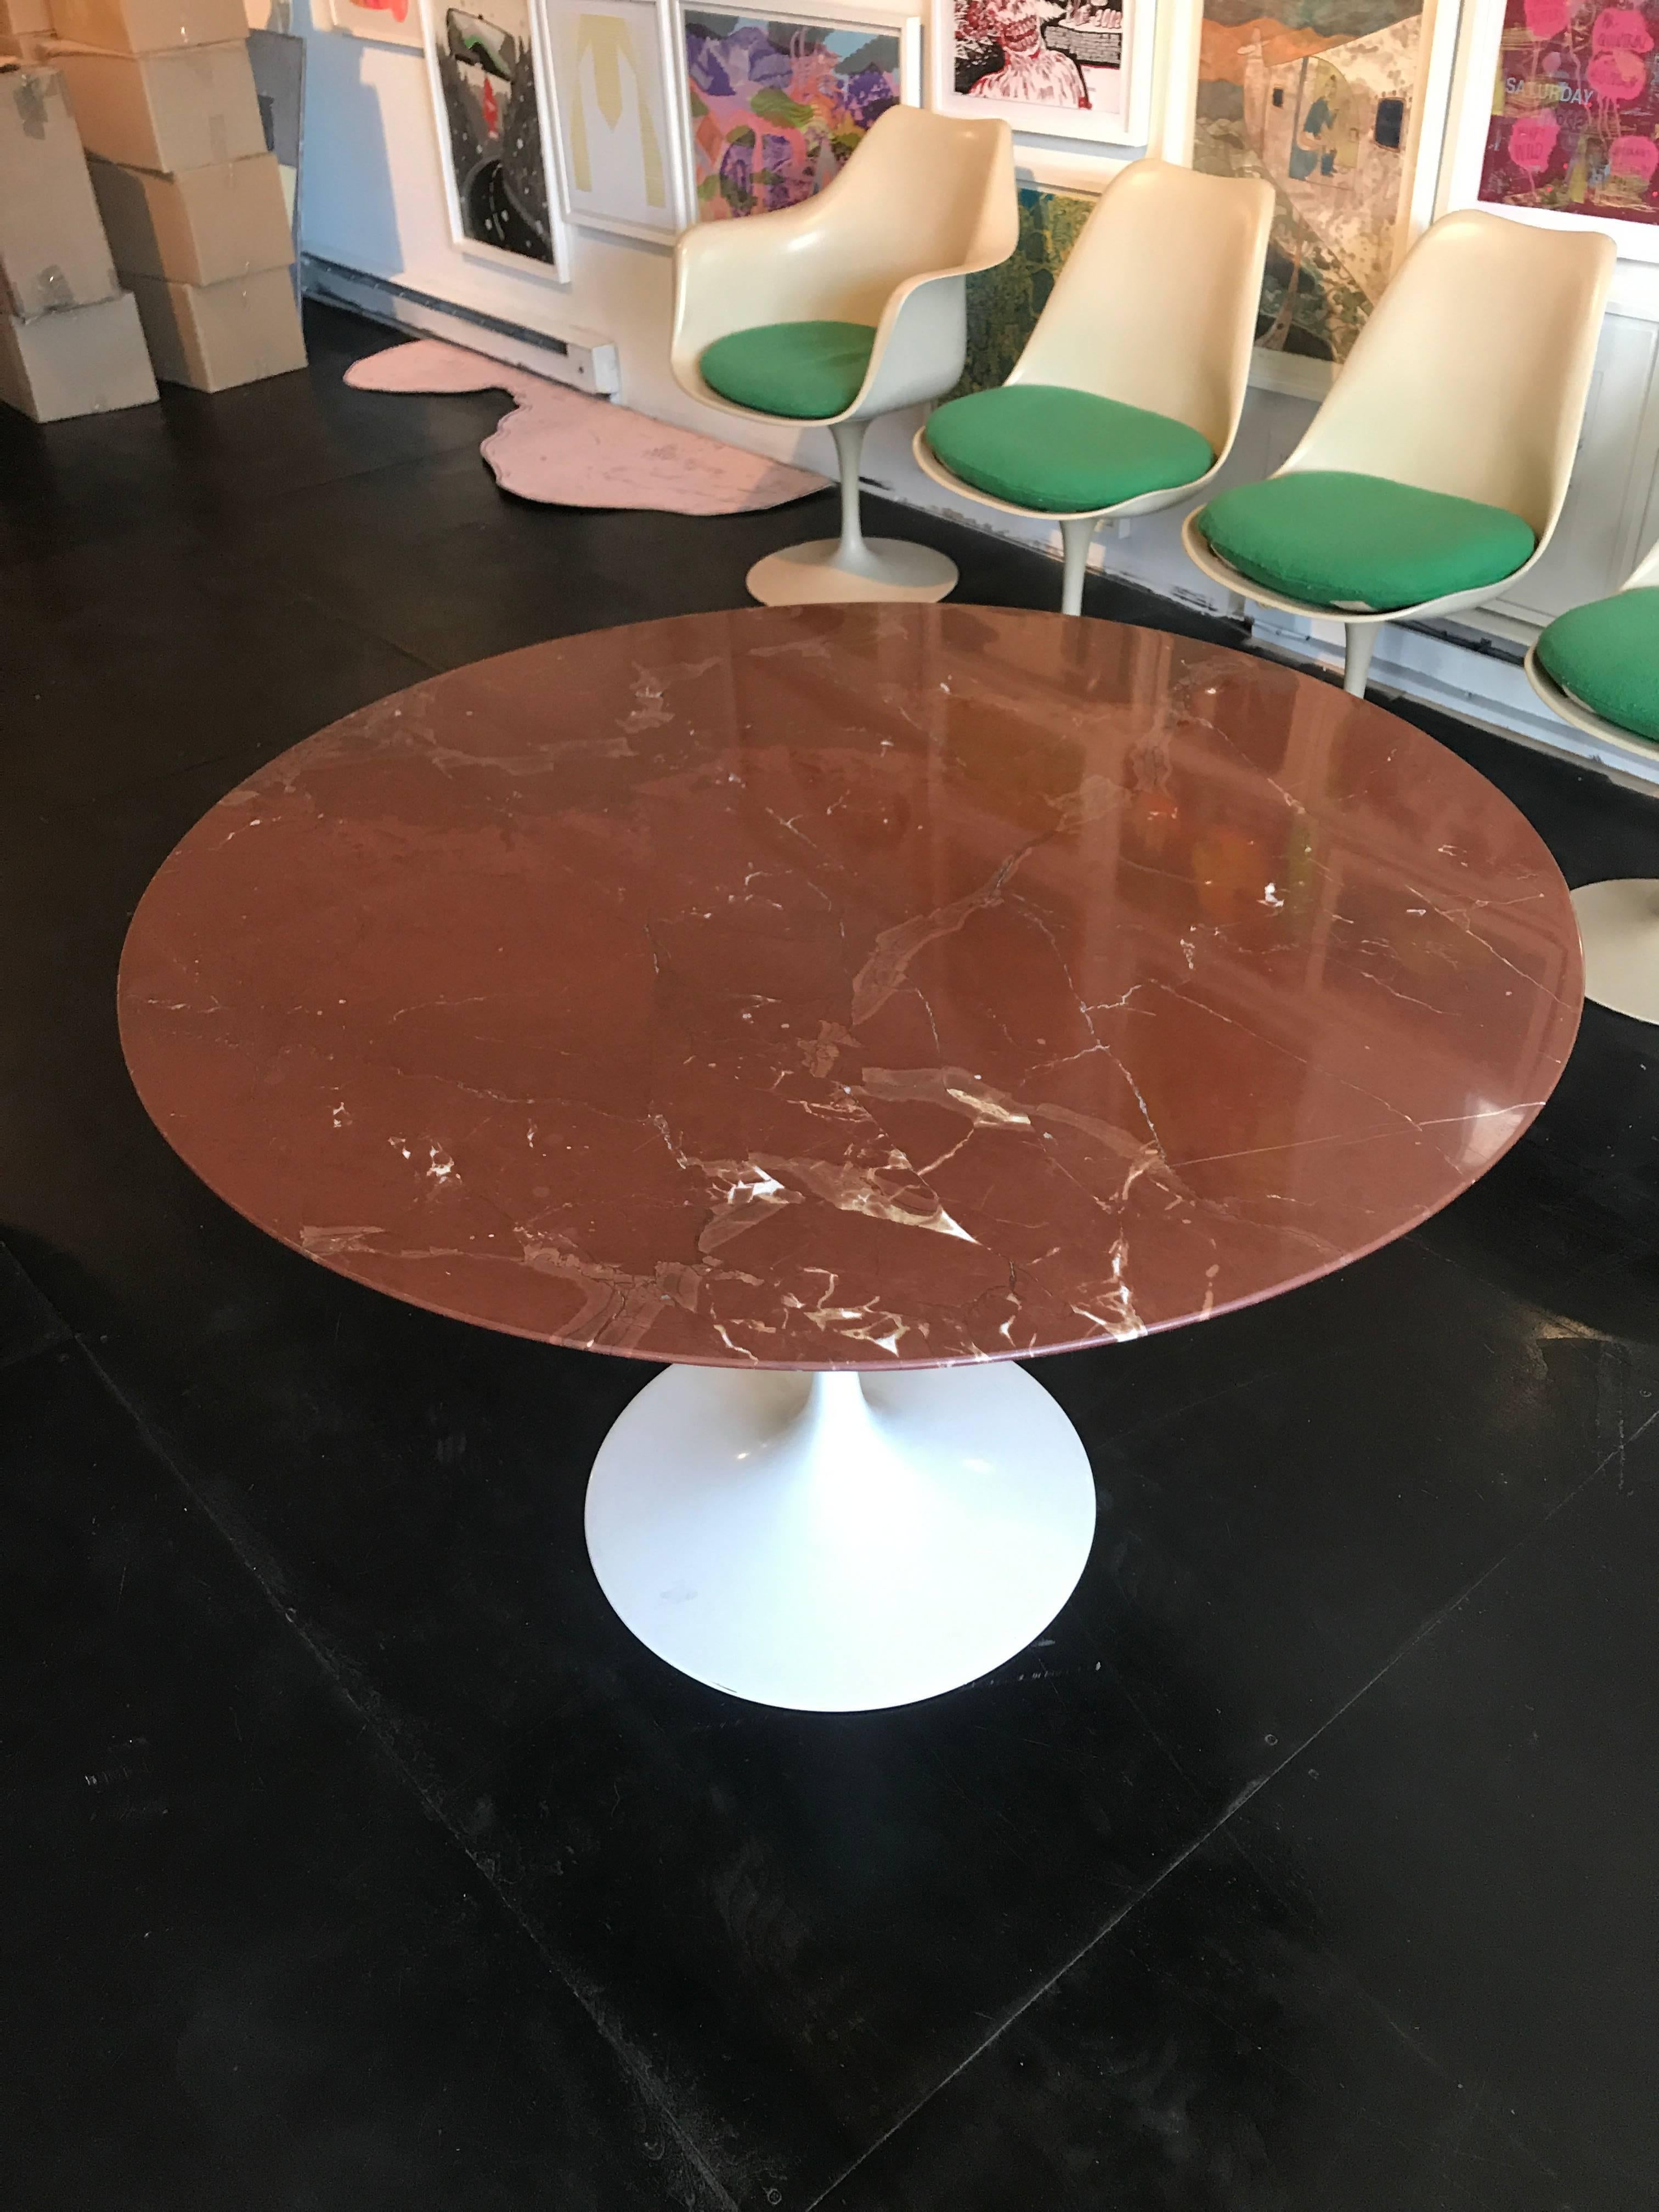 Red marble tulip table designed by Eero Saarinen, manufactured by Knoll.
Excellent condition.